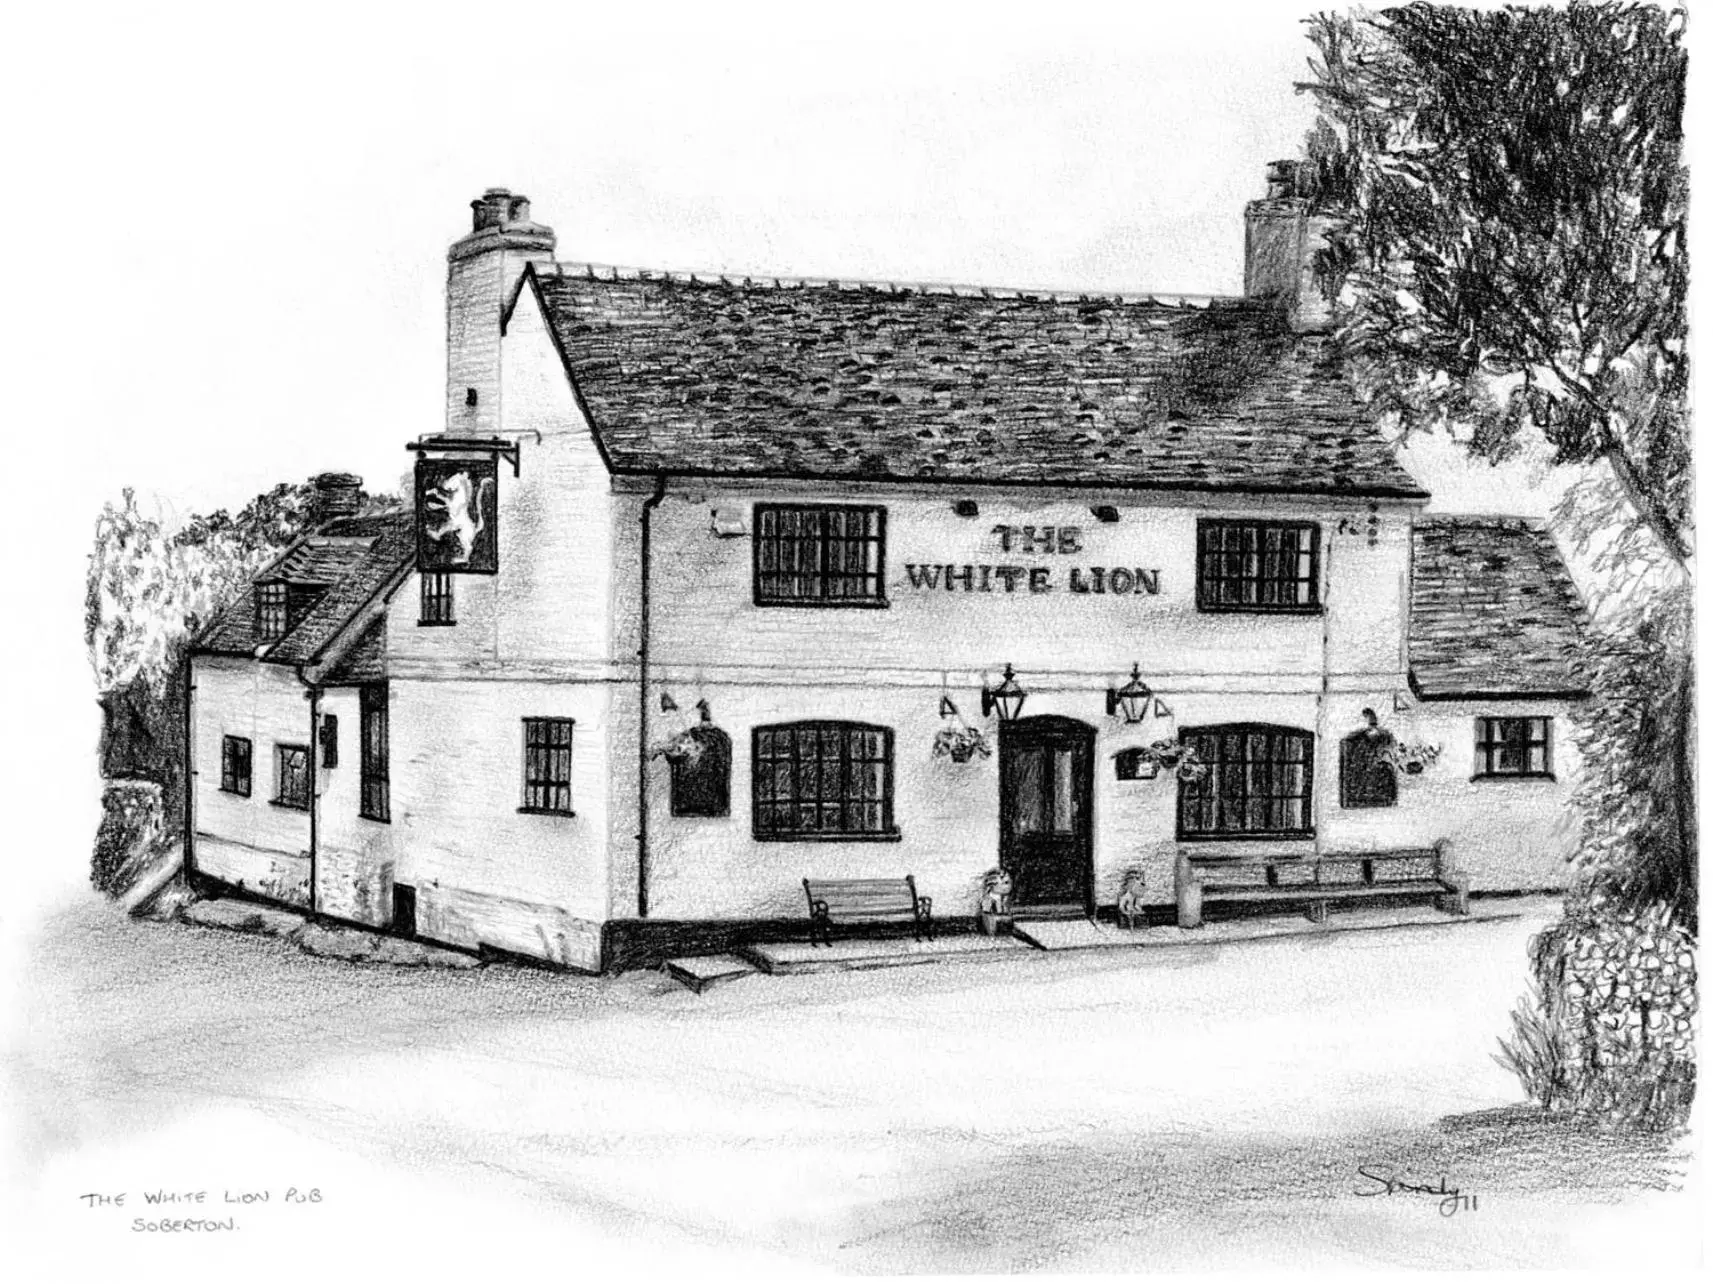 Property building, Winter in The White Lion, Soberton